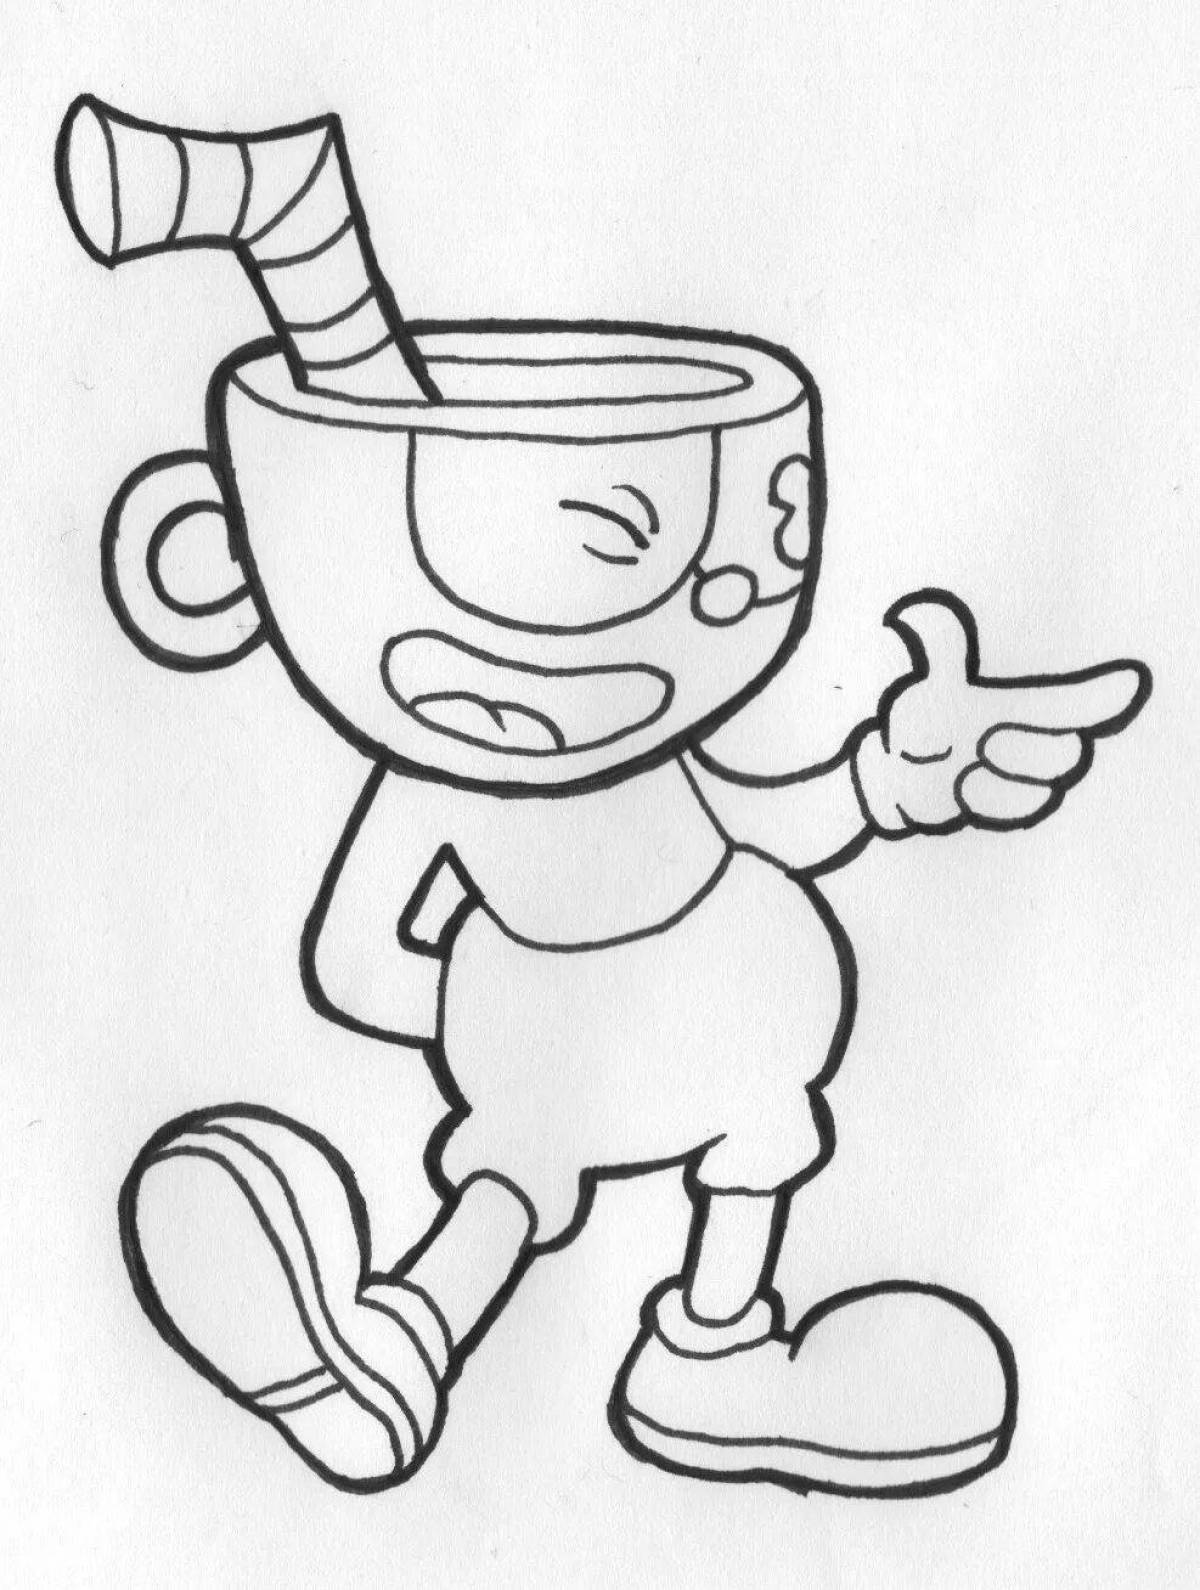 Lovely cuphead coloring page